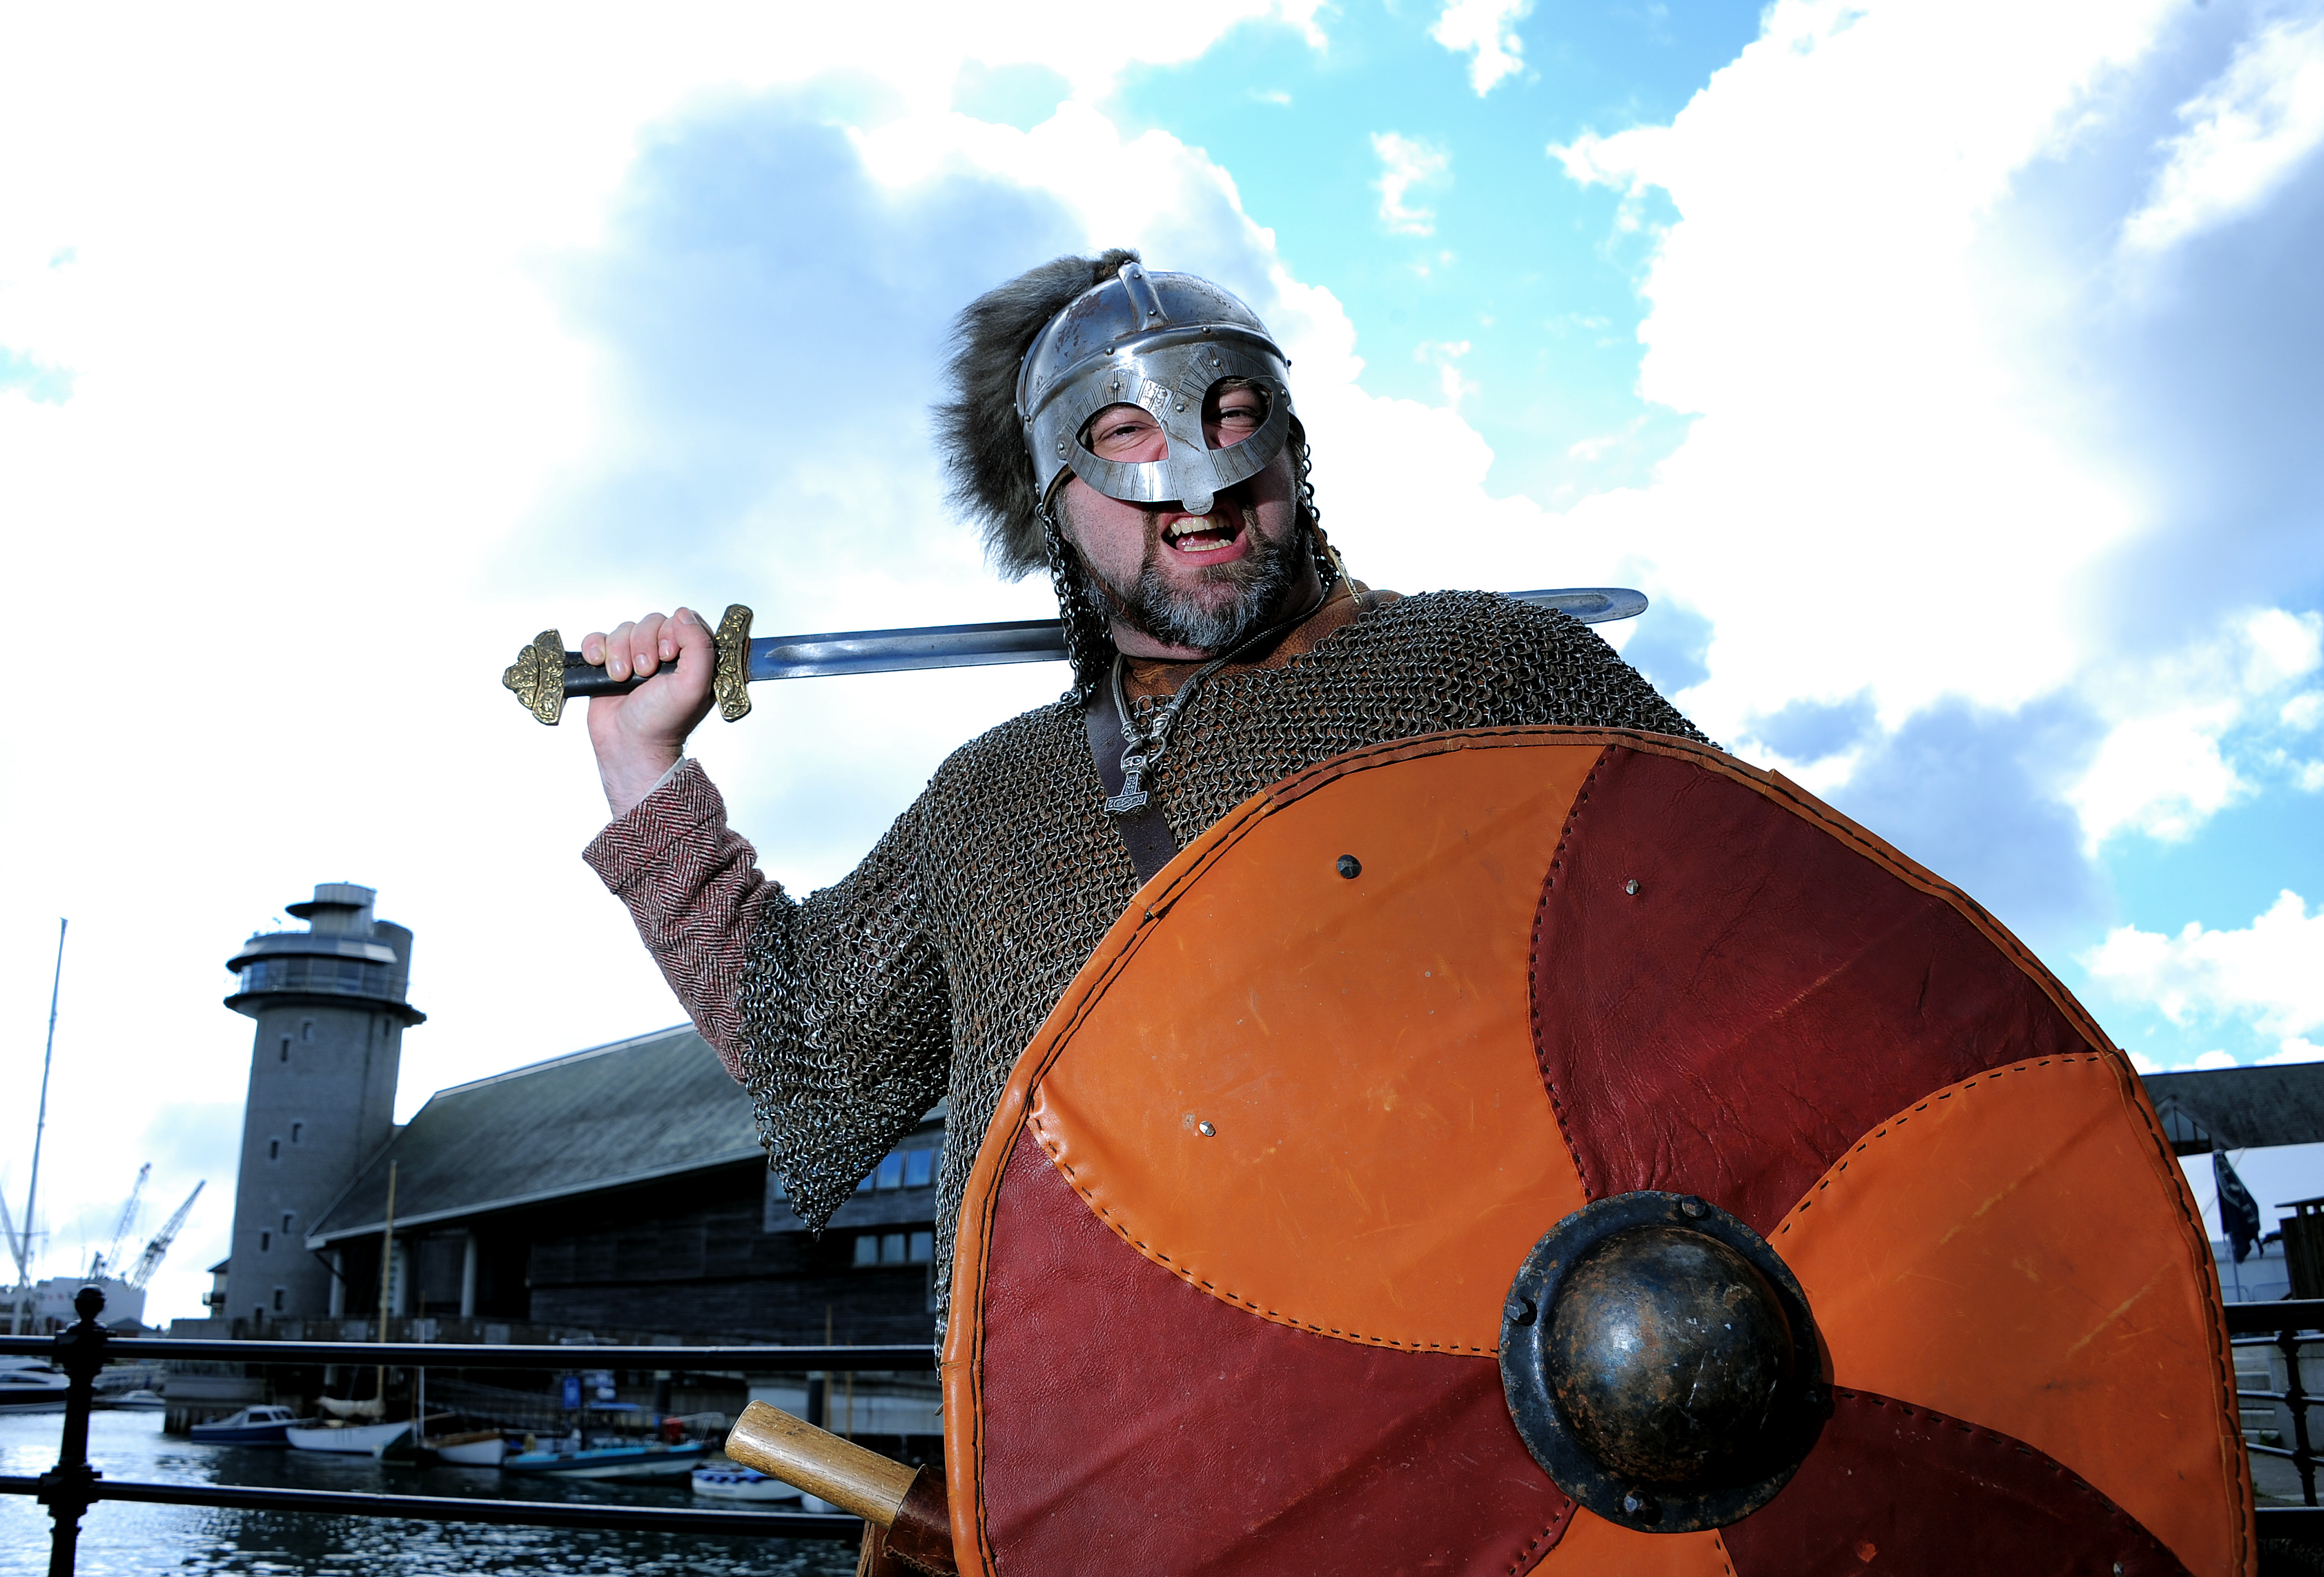 The Vikings are coming to the National Maritime Museum Cornwall